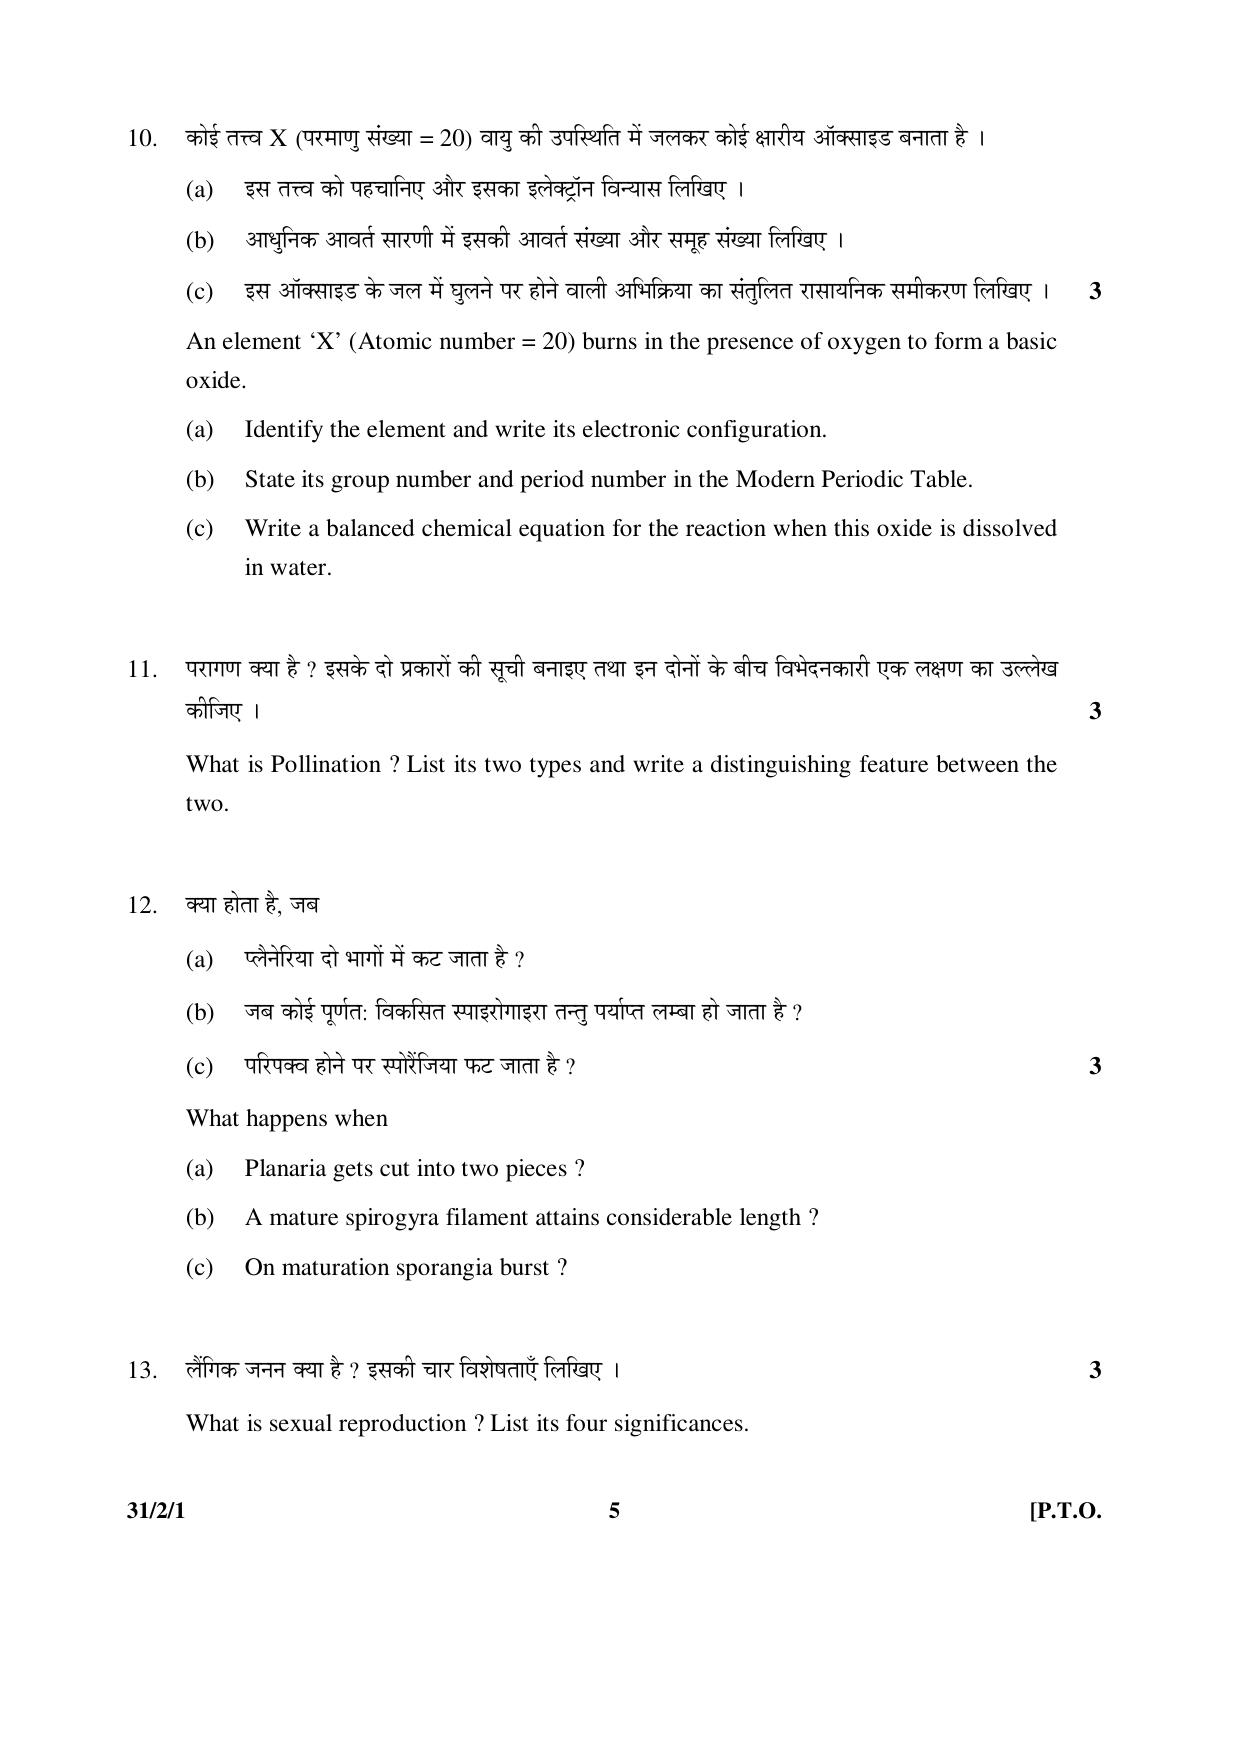 CBSE Class 10 31-2-1 _Science 2016 Question Paper - Page 5